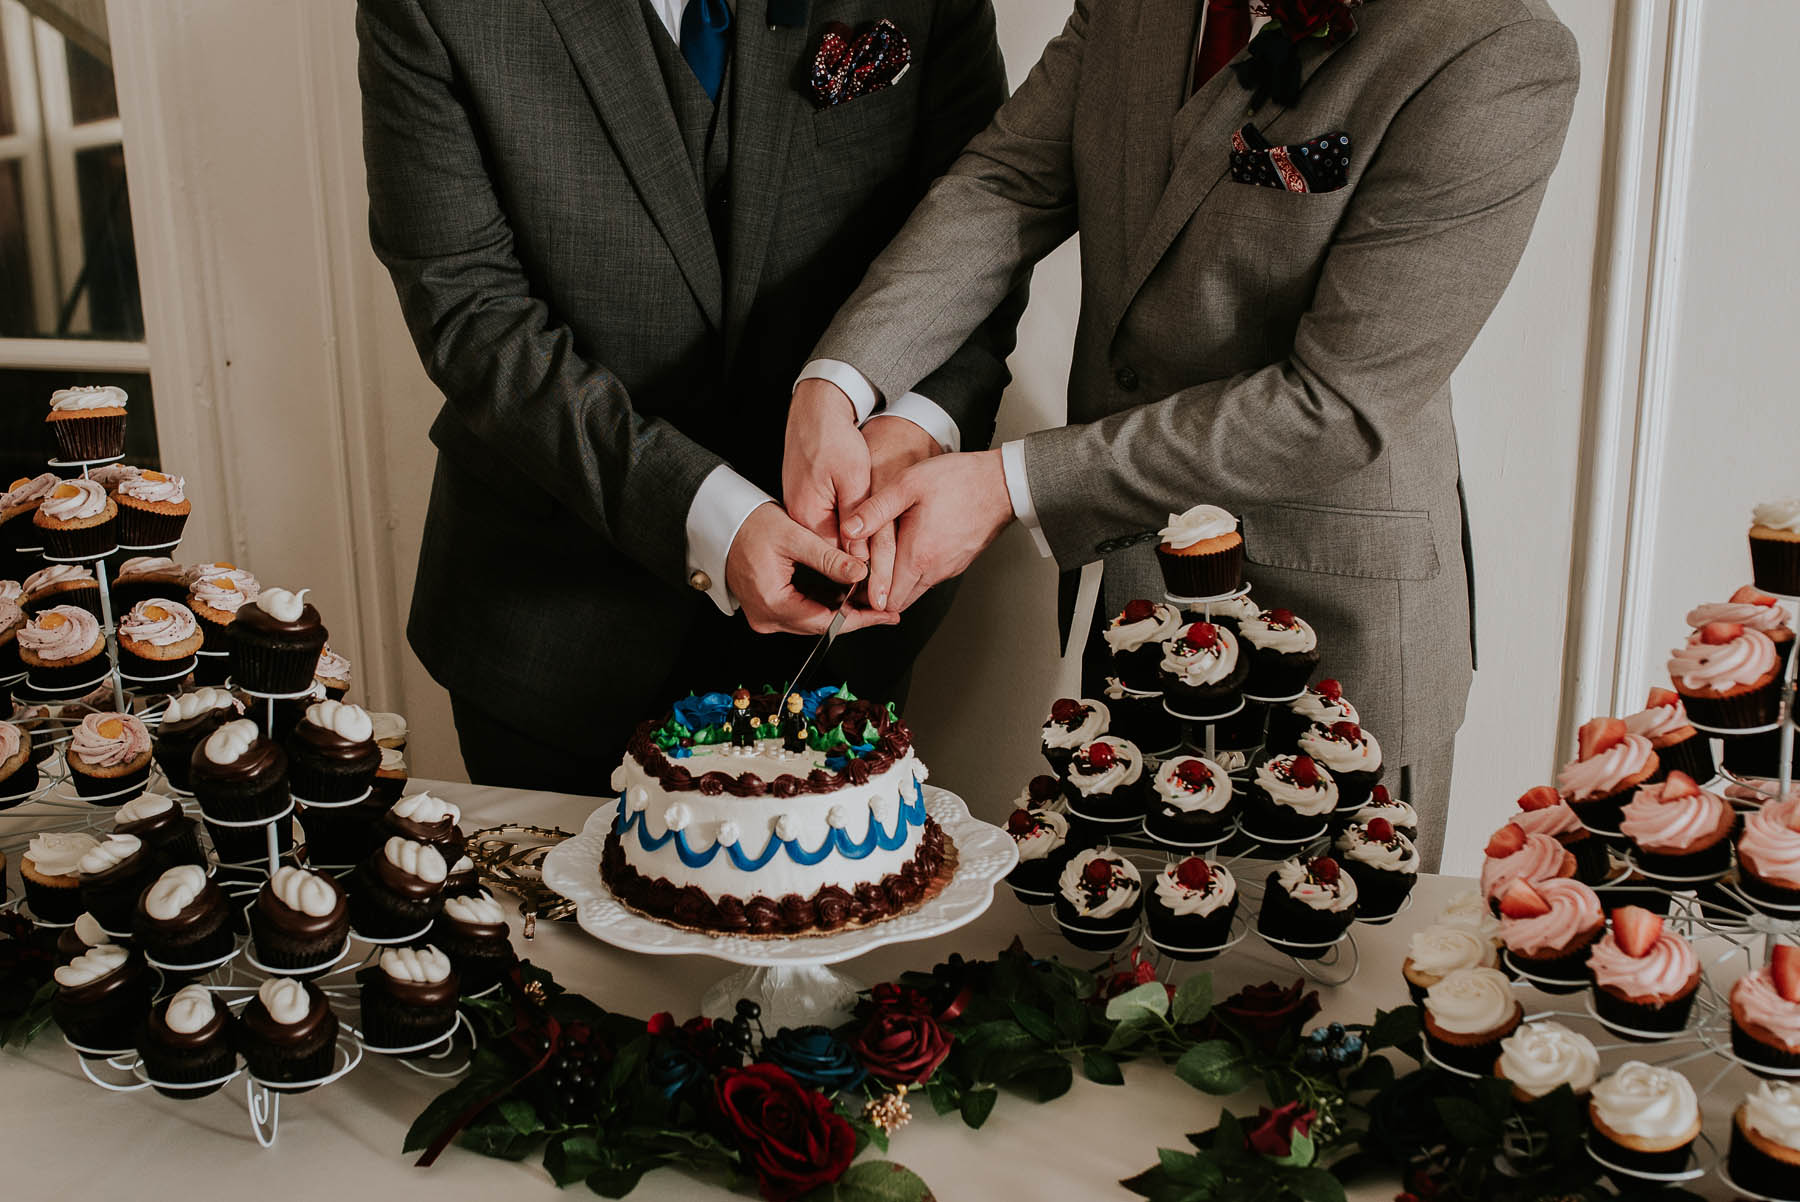 The grooms cut into a single tier cake. There are a variety of cupcakes surrounding the cake.